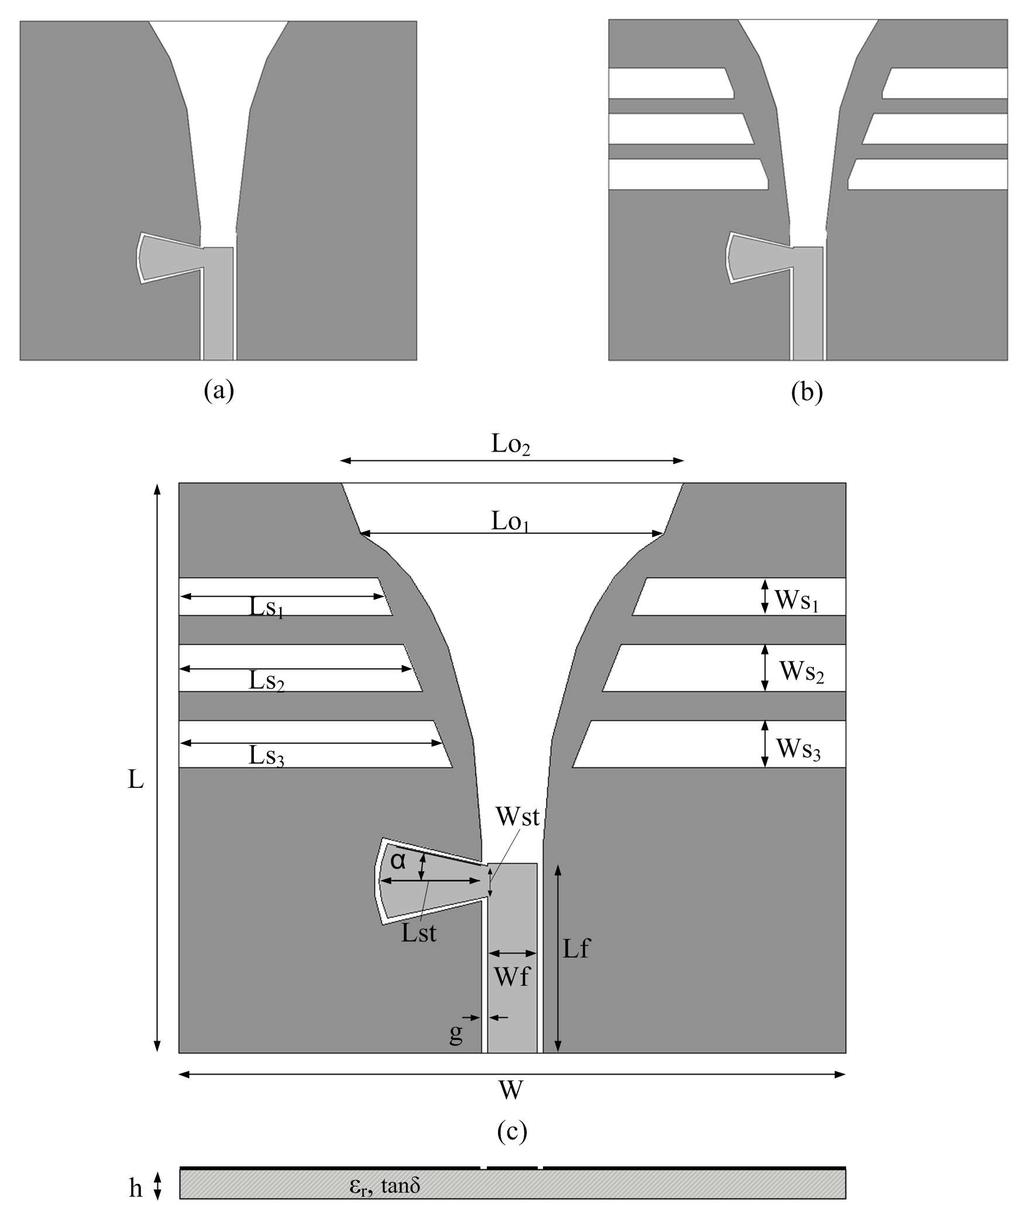 Progress In Electromagnetics Research Letters, Vol. 25, 2011 79 (a) (b) (c) Figure 1. The geometry of the proposed antennas. (a) A1; (b) A2; (c) A3. loaded on the outer side of the antenna arms.